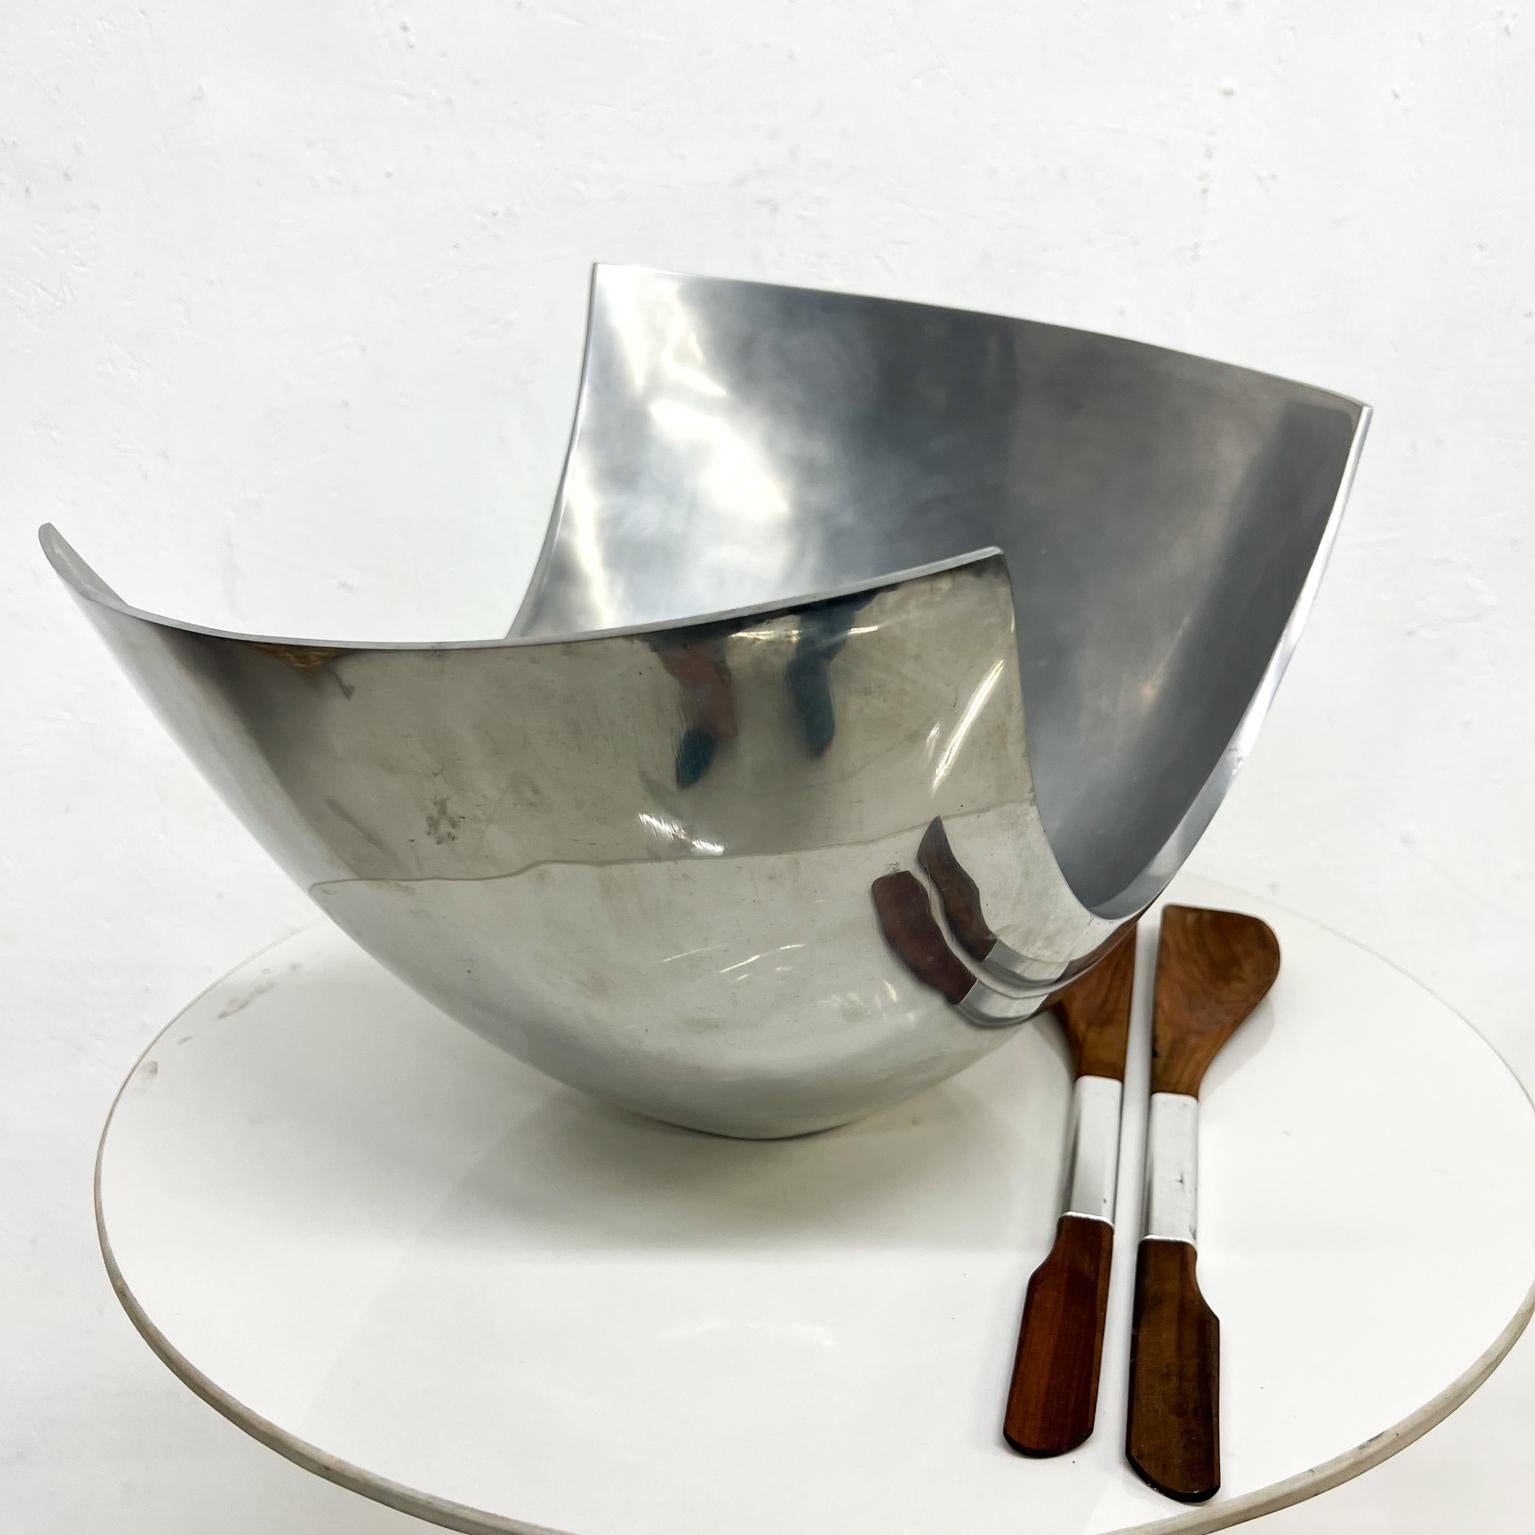 1980s Michael Lax Design Polished Bowl Serving Set for Metaal In Good Condition For Sale In Chula Vista, CA